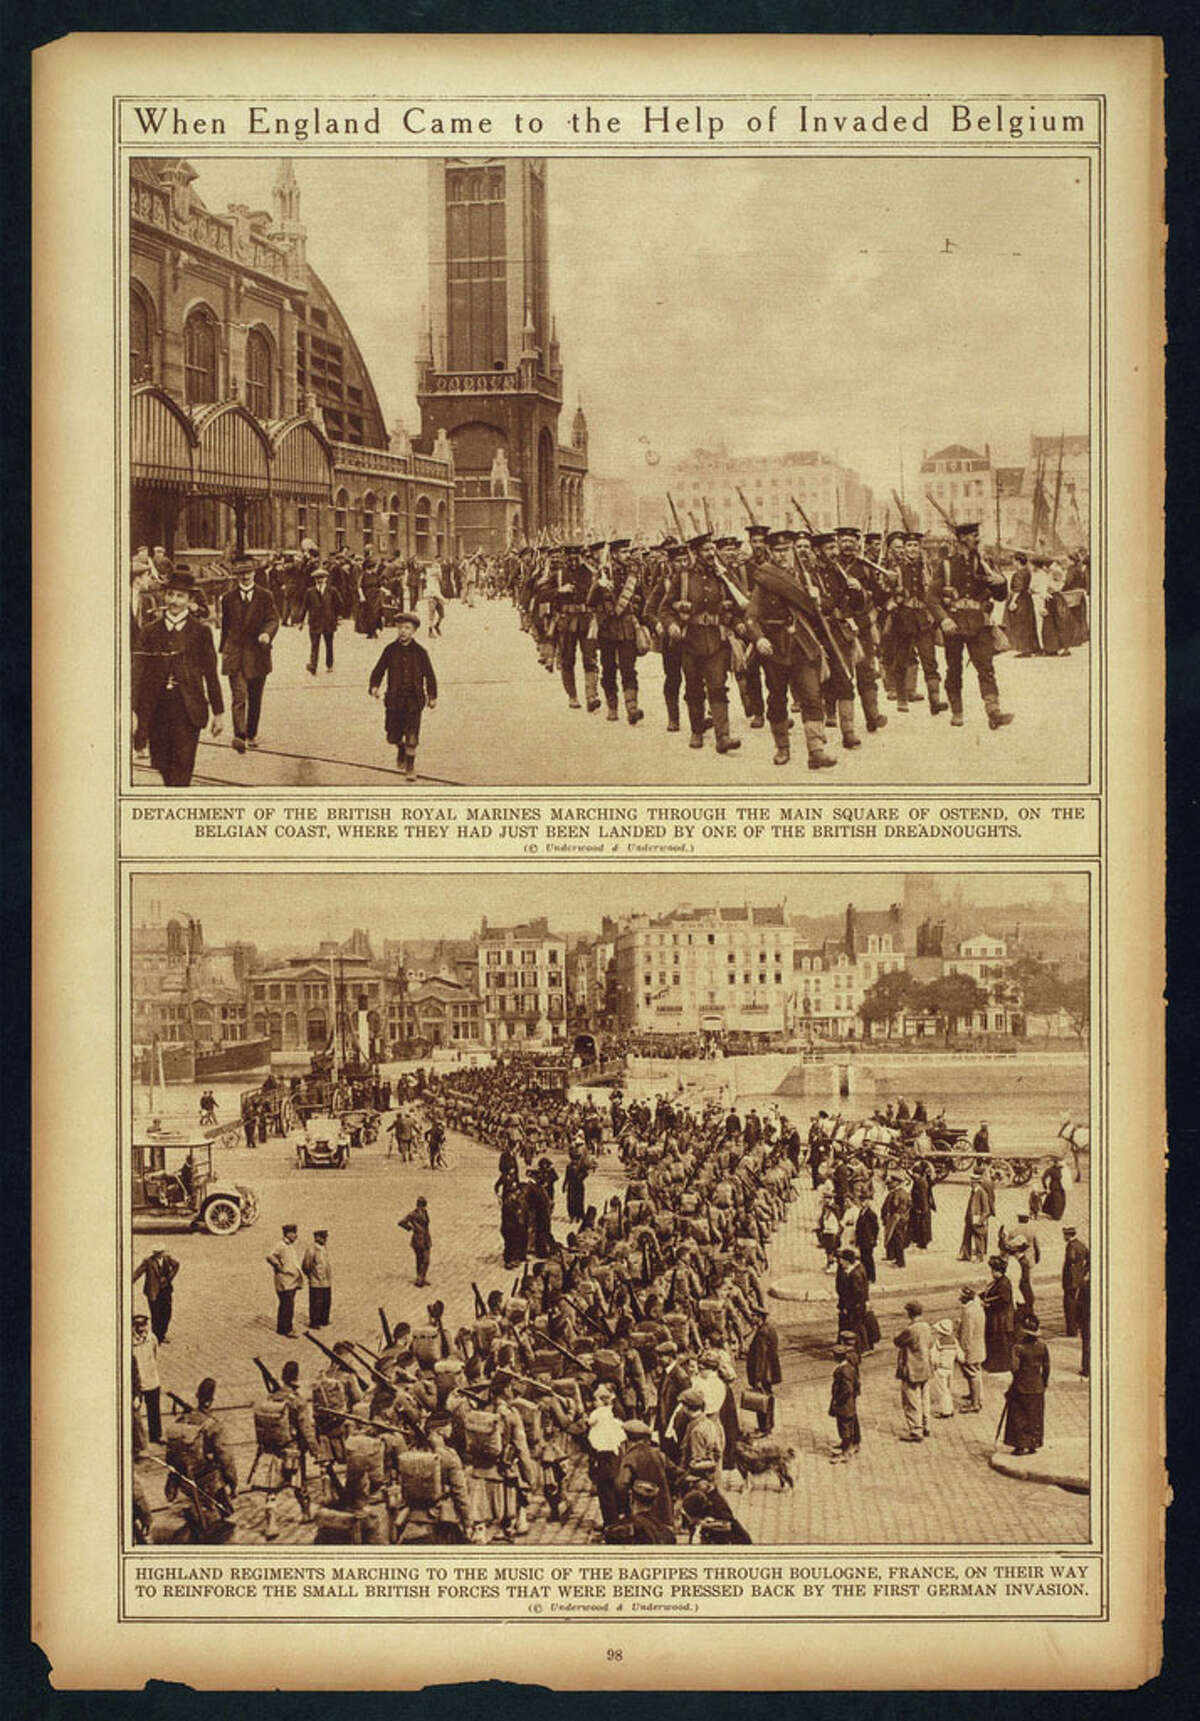 "When England came to the help of invaded Belgium." Library of Congress notes: "Selected from "The War of the Nations: Portfolio in Rotogravure Etchings," published by the New York Times shortly after the 1919 armistice."